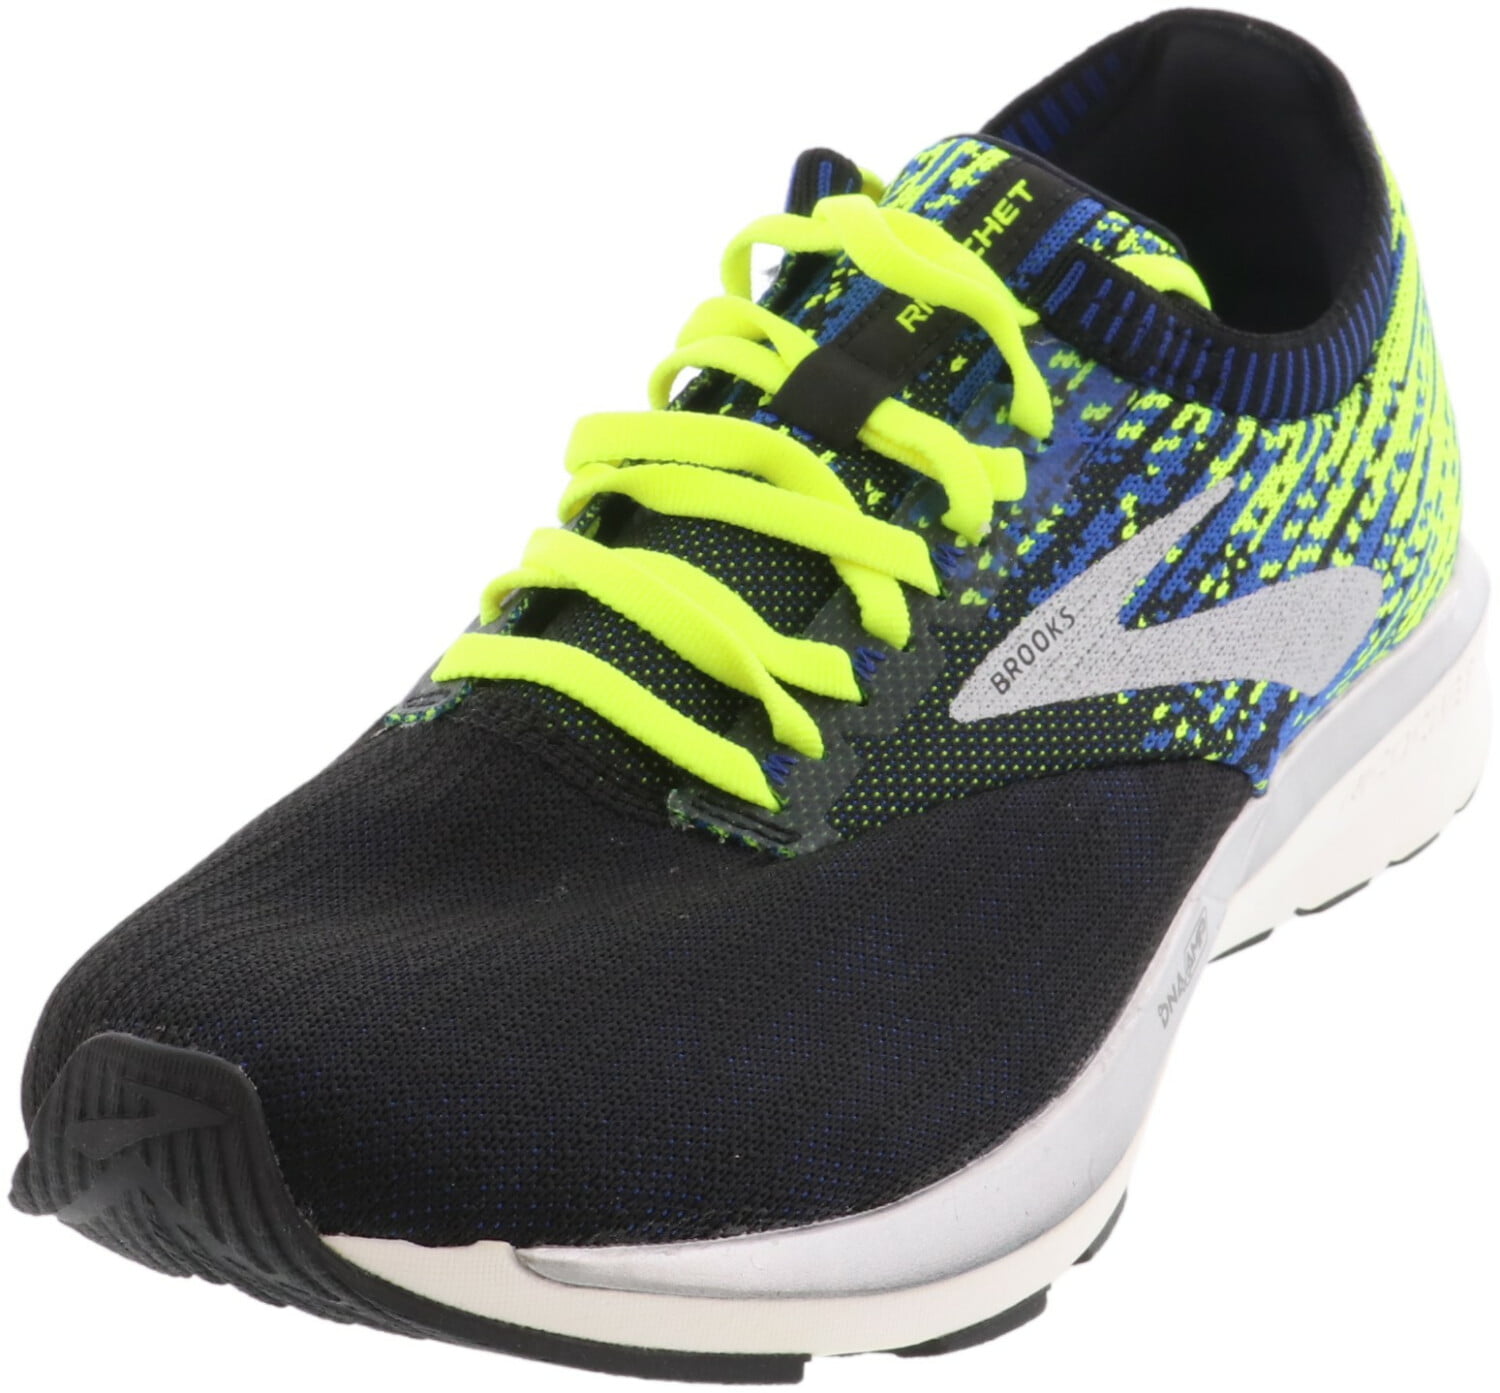 Brooks Mens Ricochet Running Shoes Trainers Sneakers Black Green Sports 